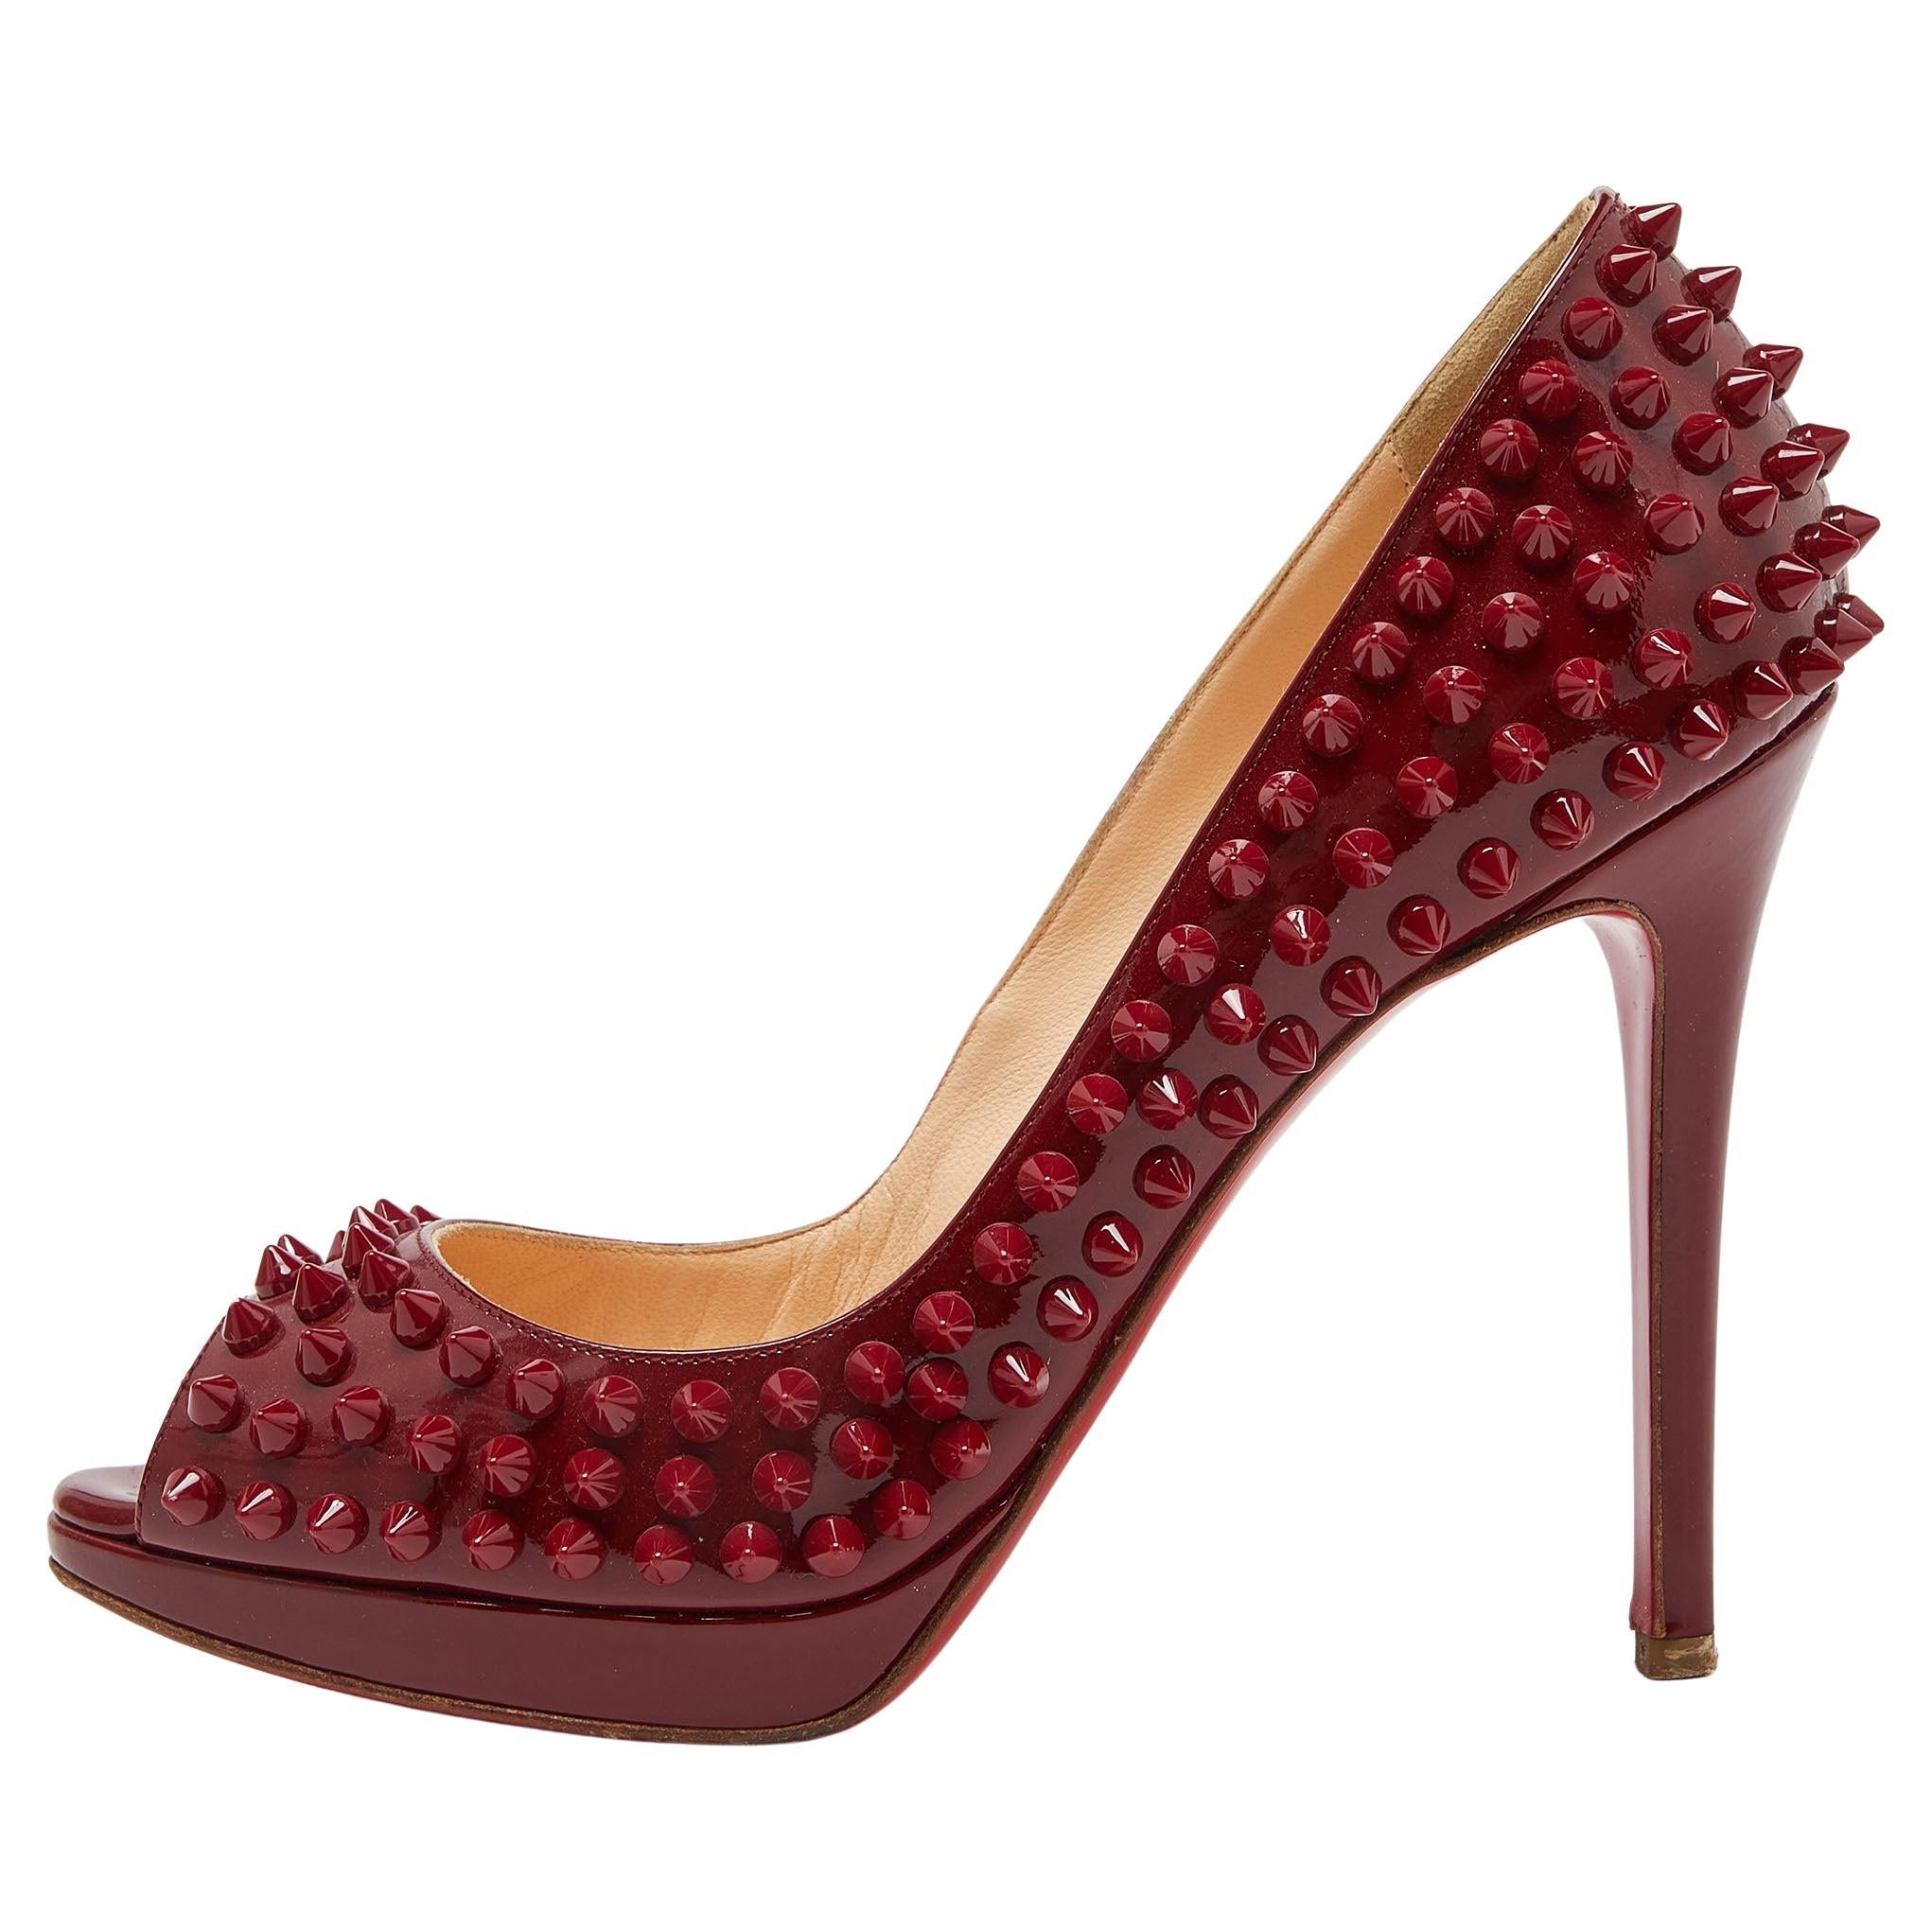 Christian Louboutin Red Patent Leather Yolanda Spiked Peep-Toe Pumps Size 37.5 For Sale